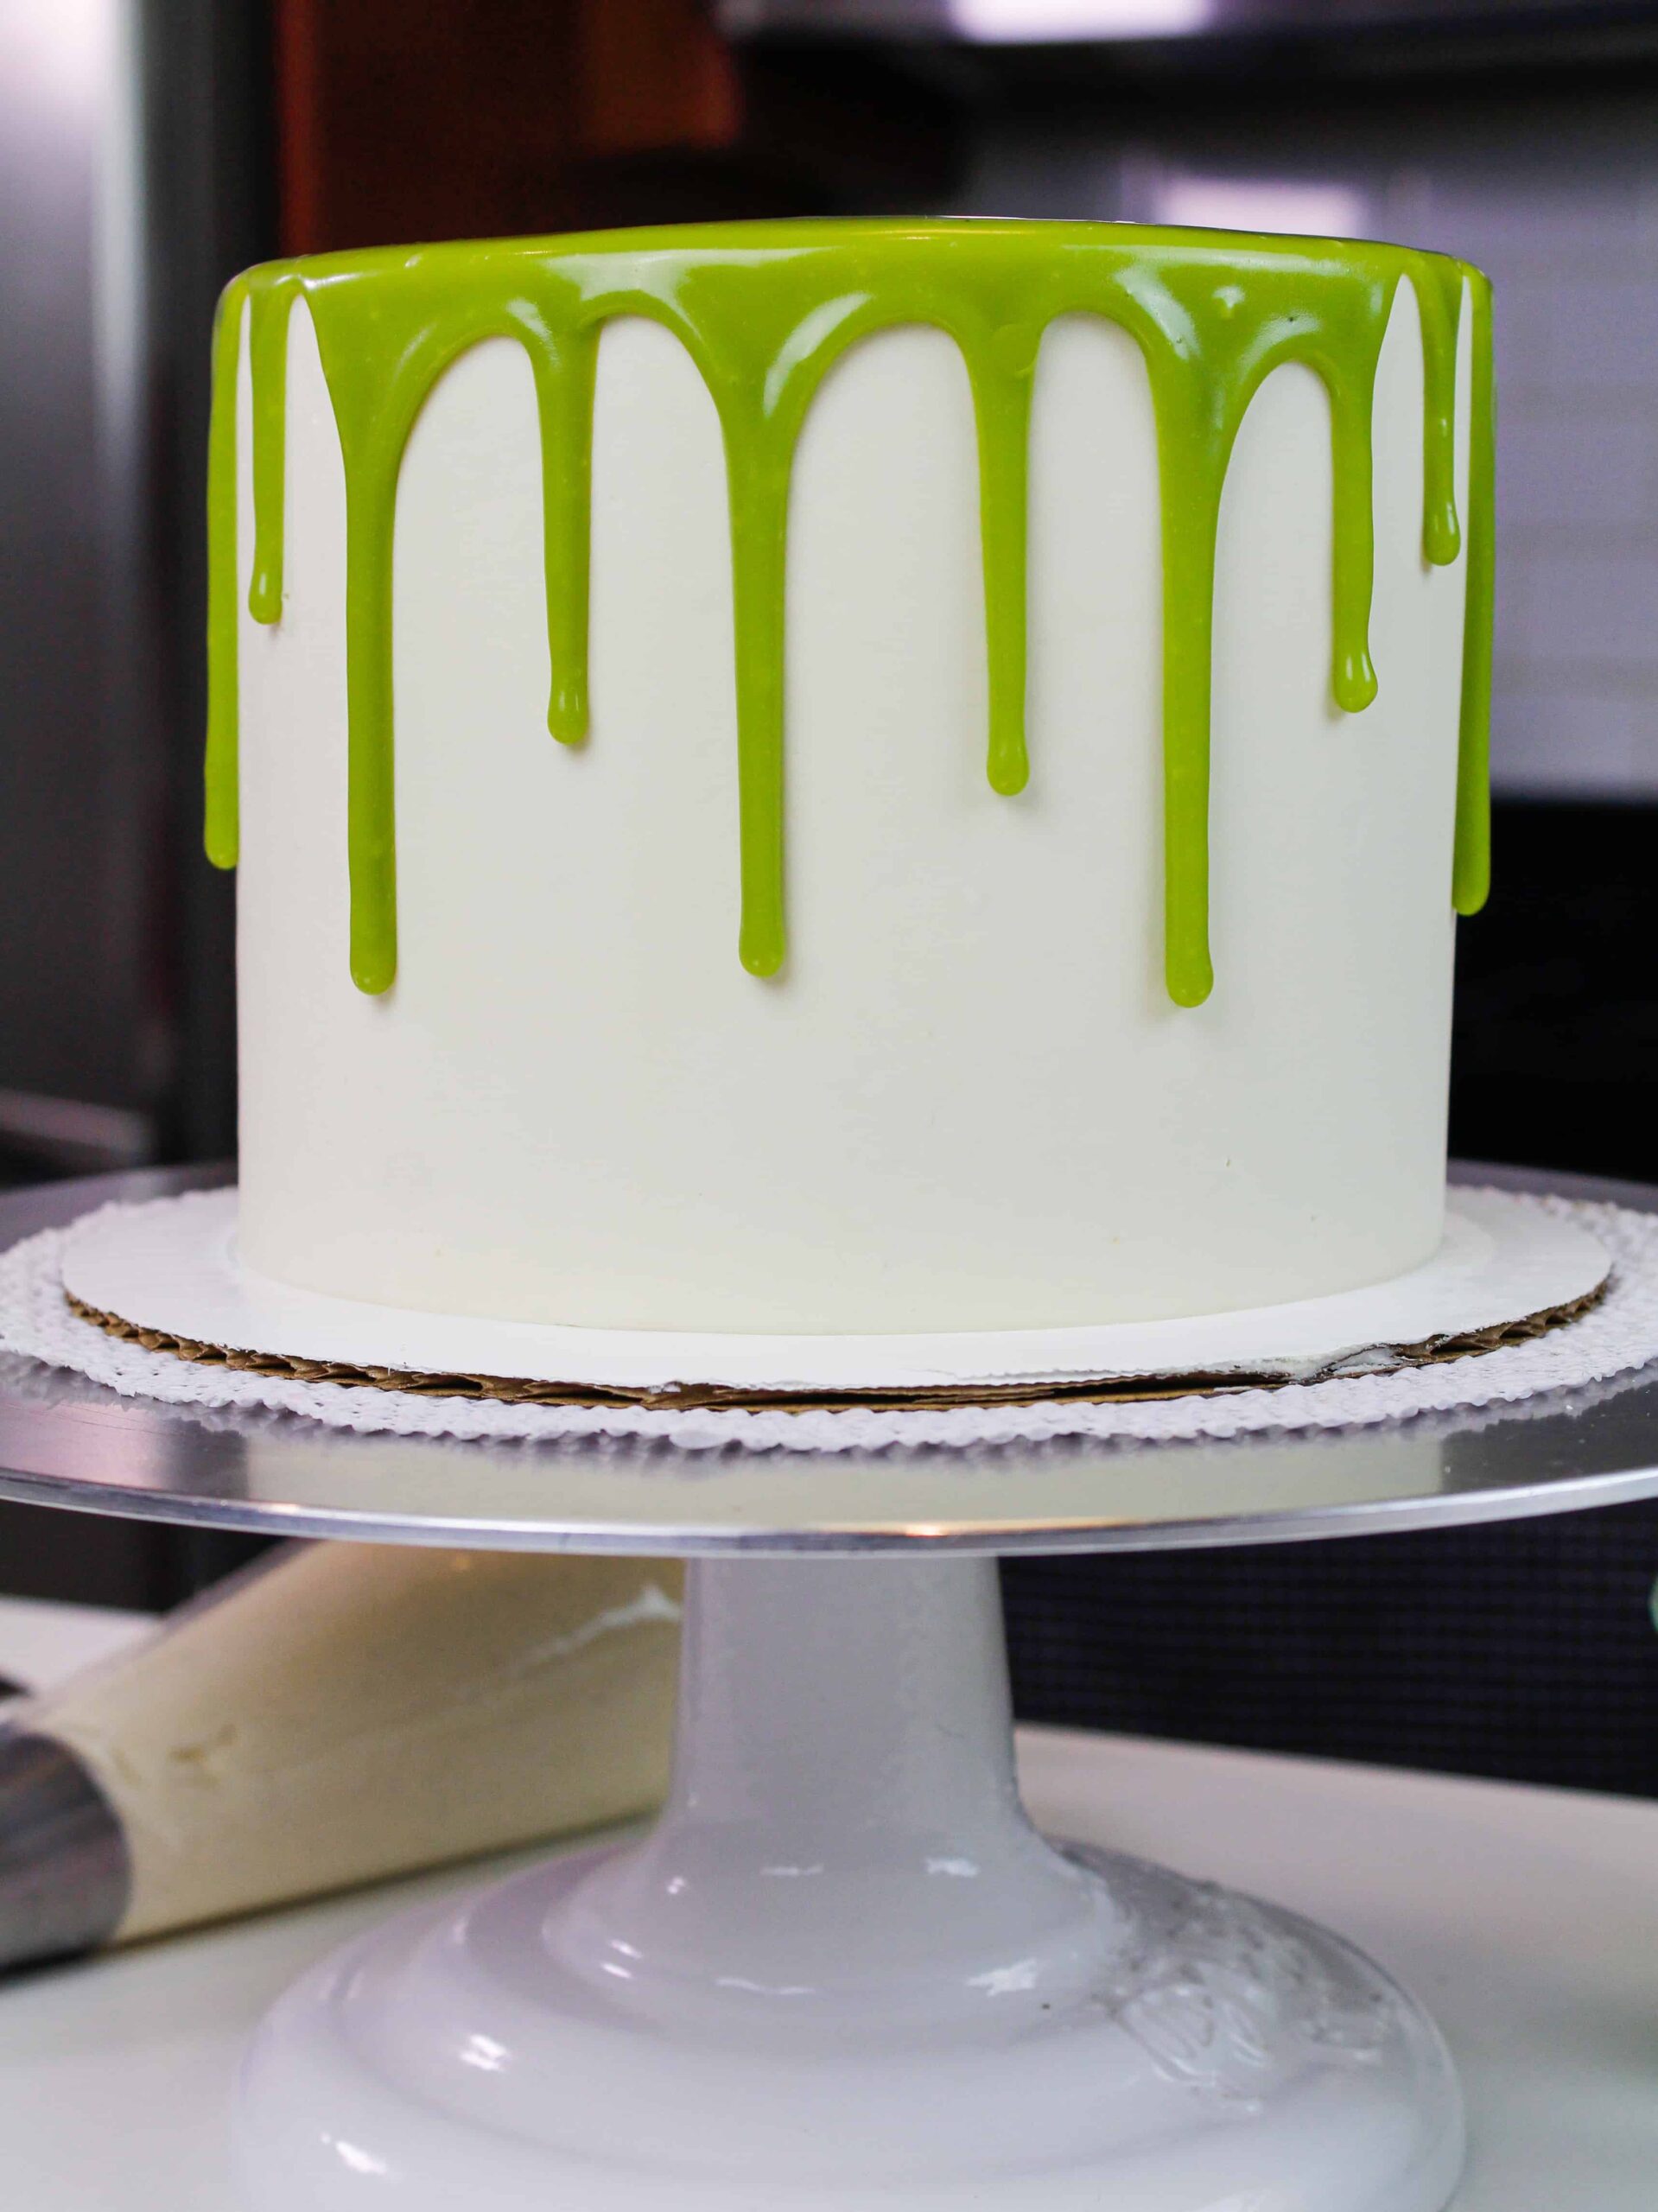 photo of a matcha cake decorated with green matcha drips 